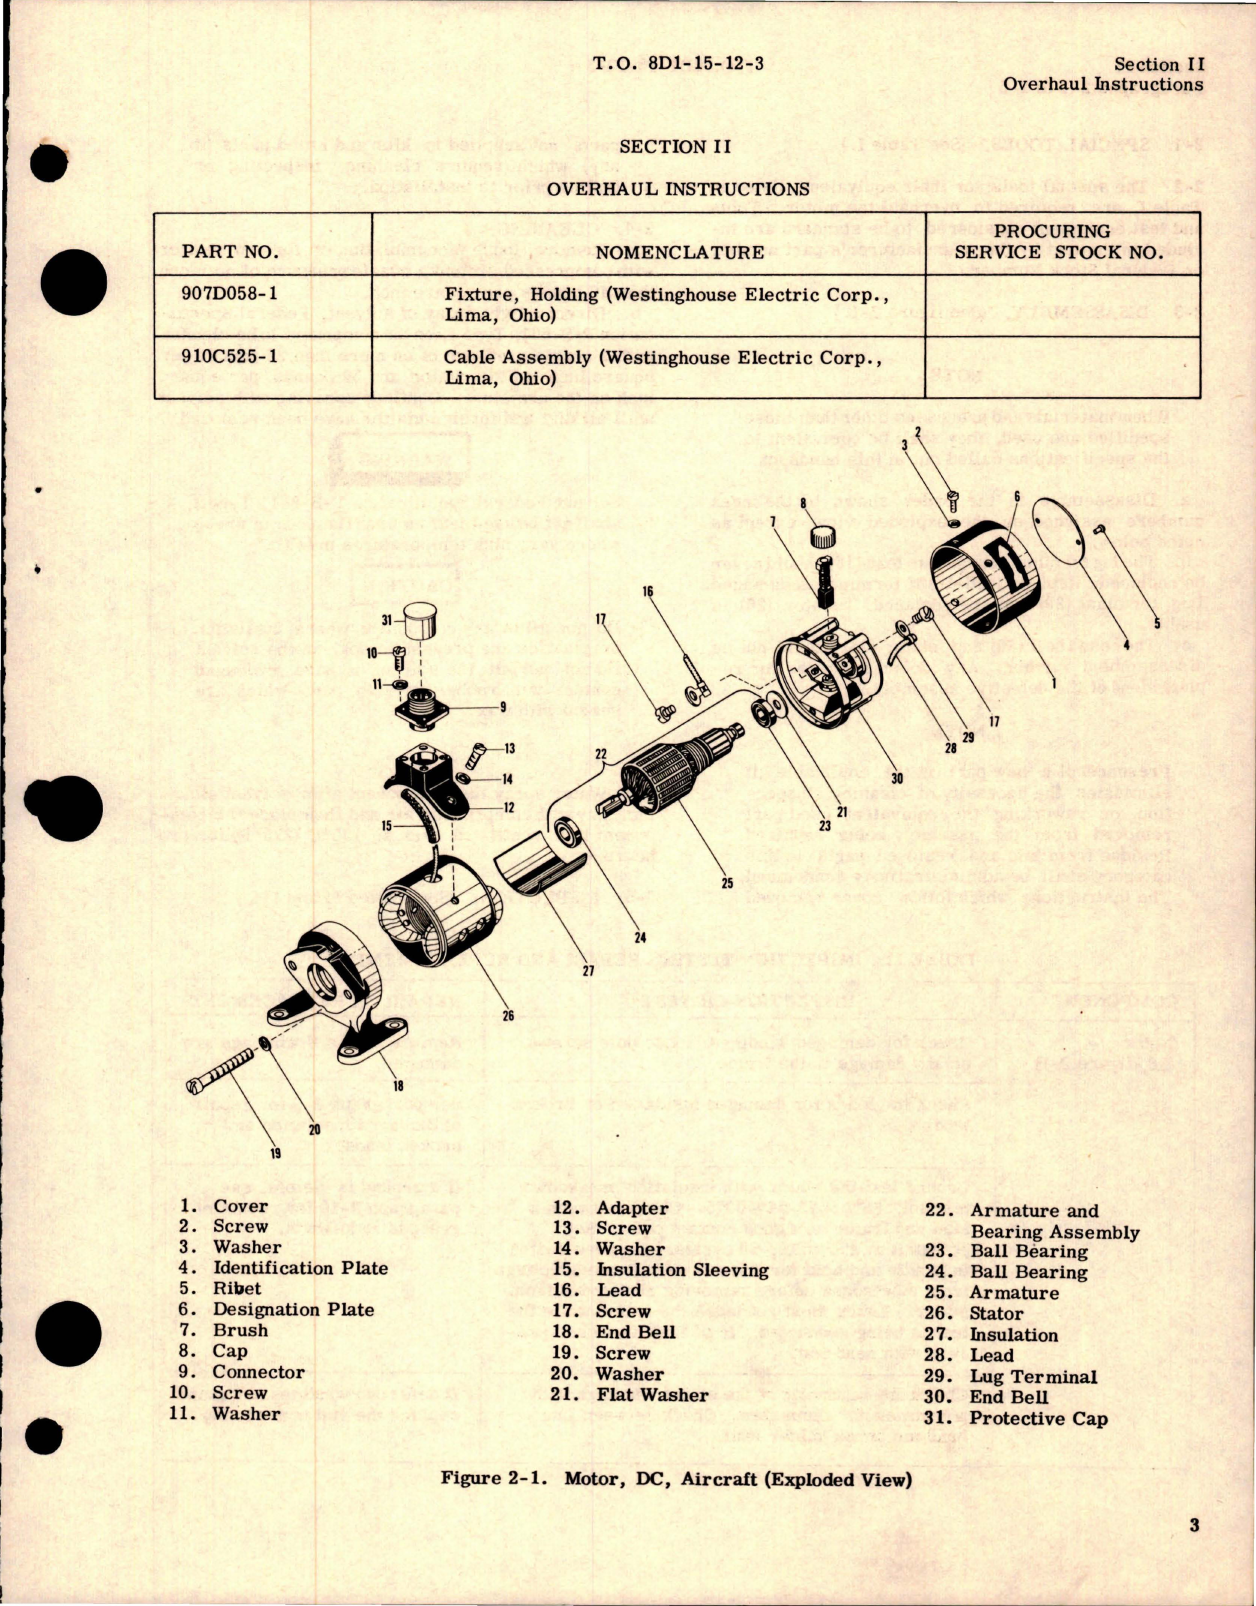 Sample page 7 from AirCorps Library document: Overhaul Instructions for DC Motor - Part A19A6196-2